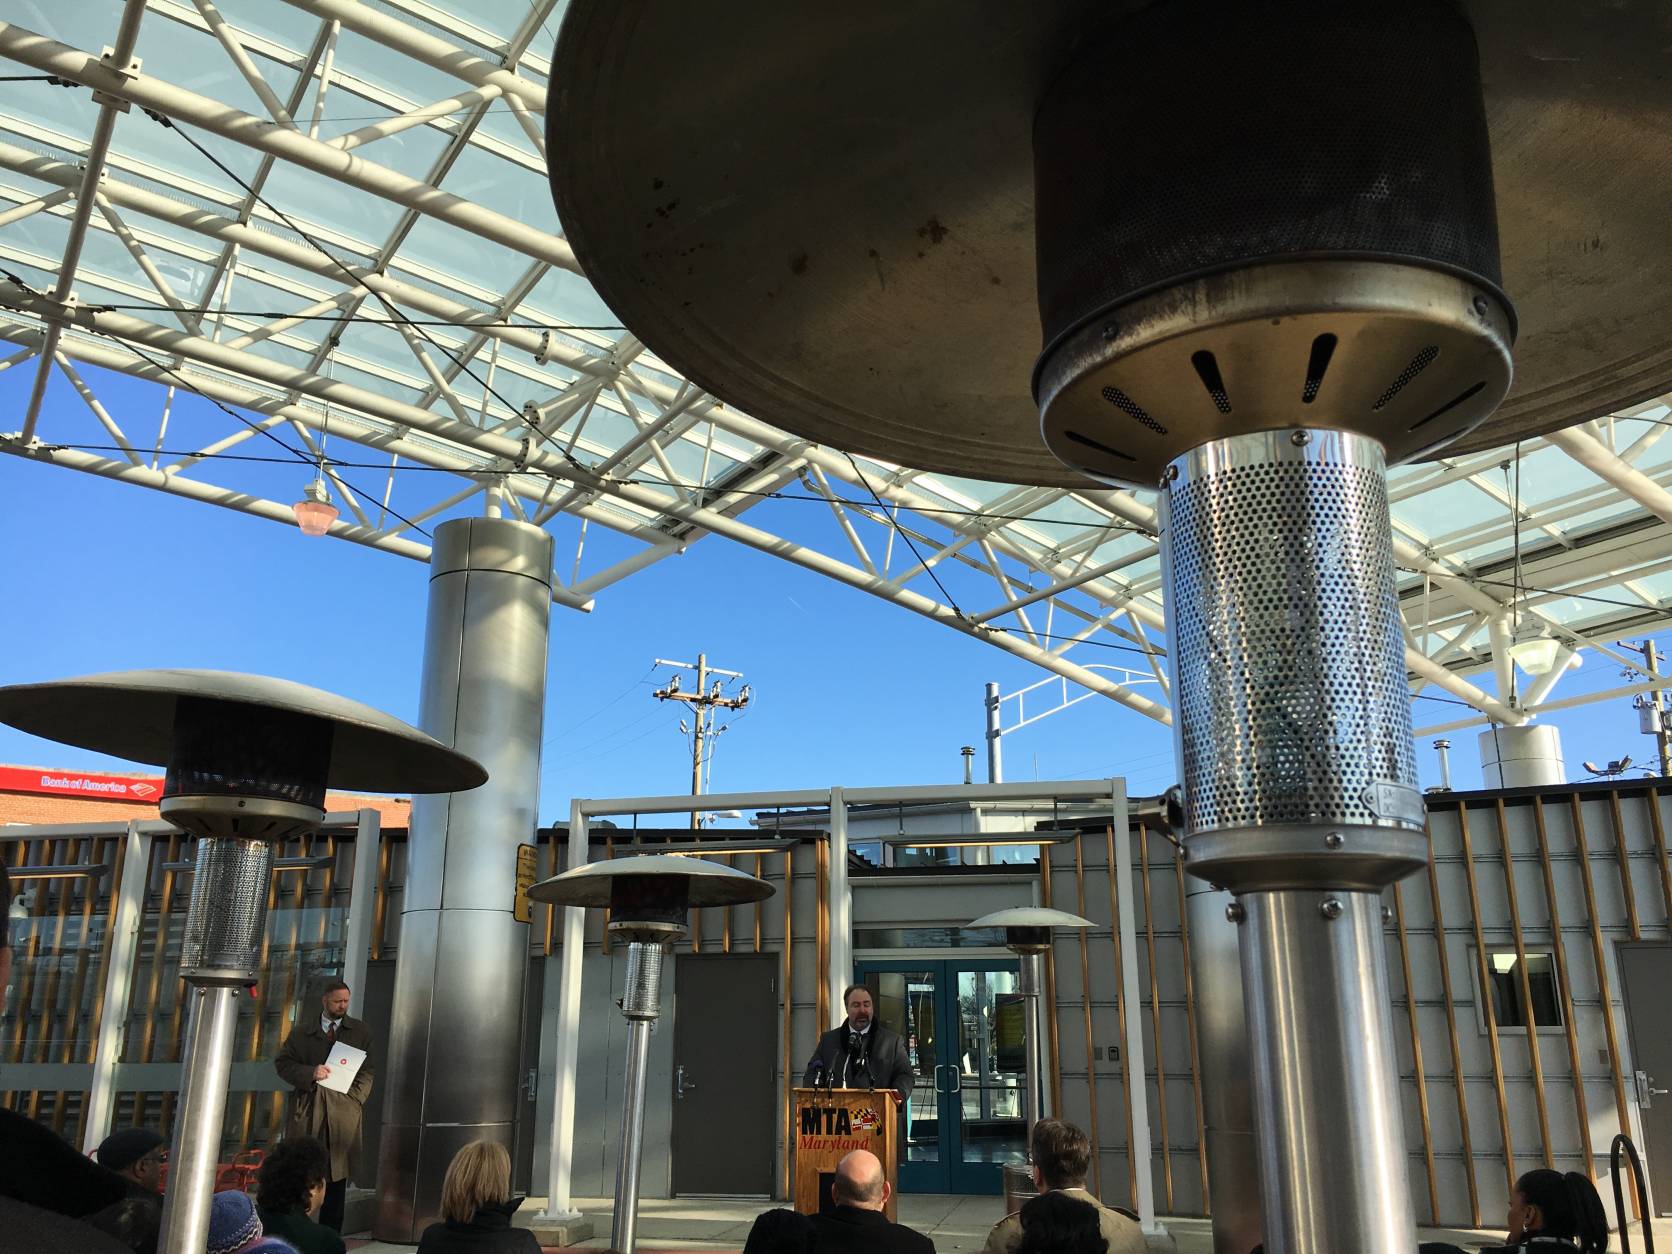 The view from under the canopy at the new Takoma-Langley Crossroads Transit Center. (WTOP/Kate Ryan)